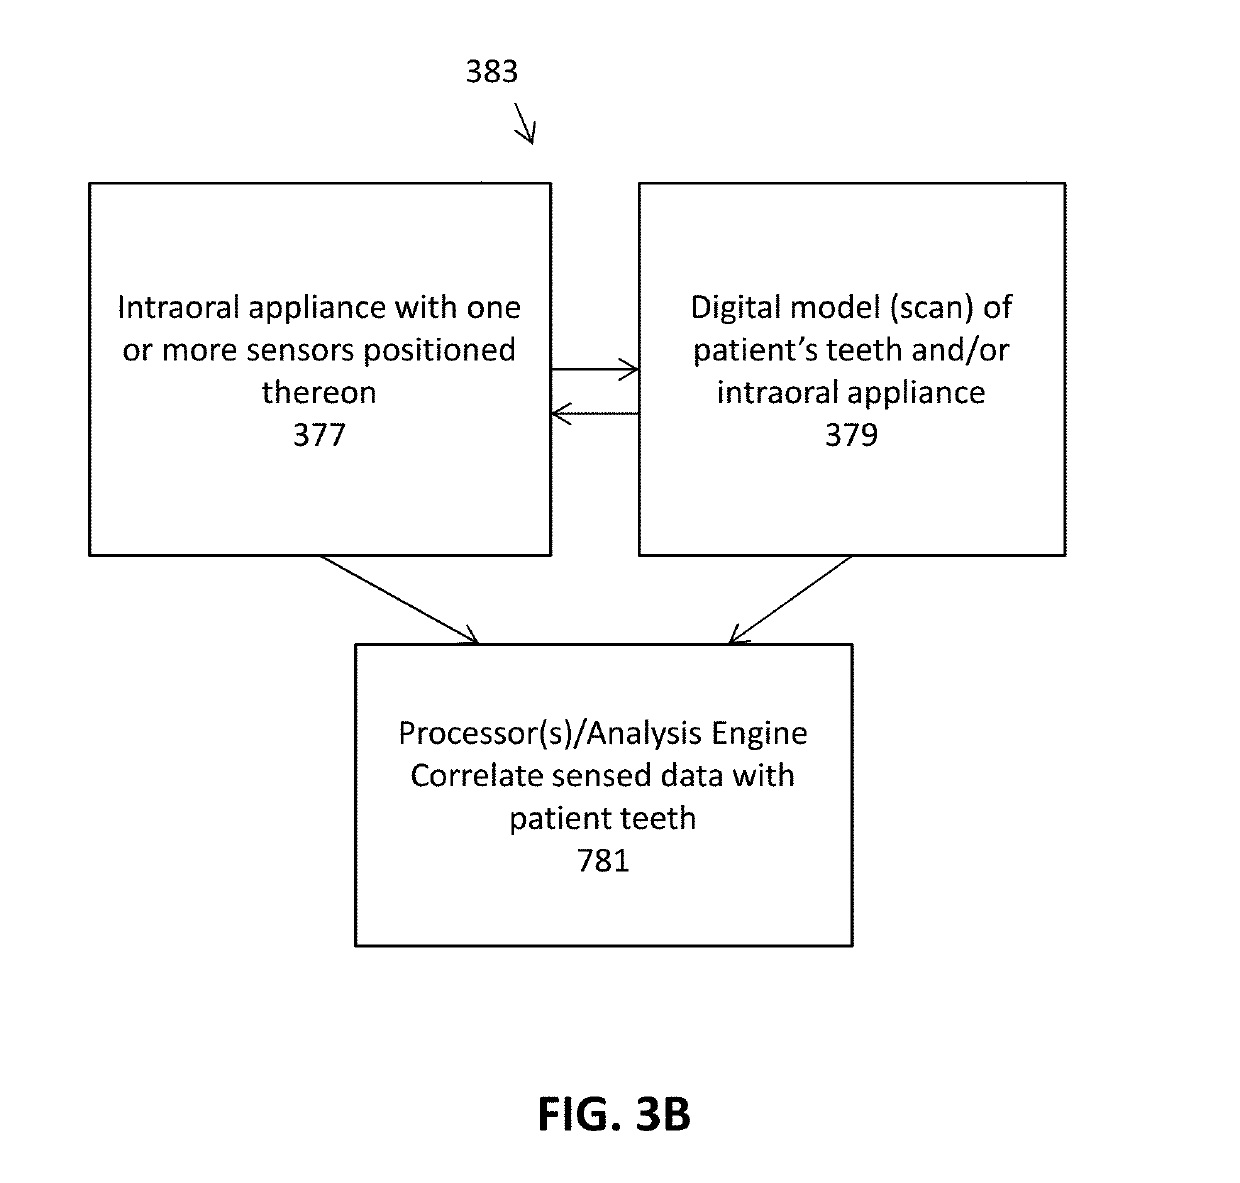 Intraoral appliances with sensing